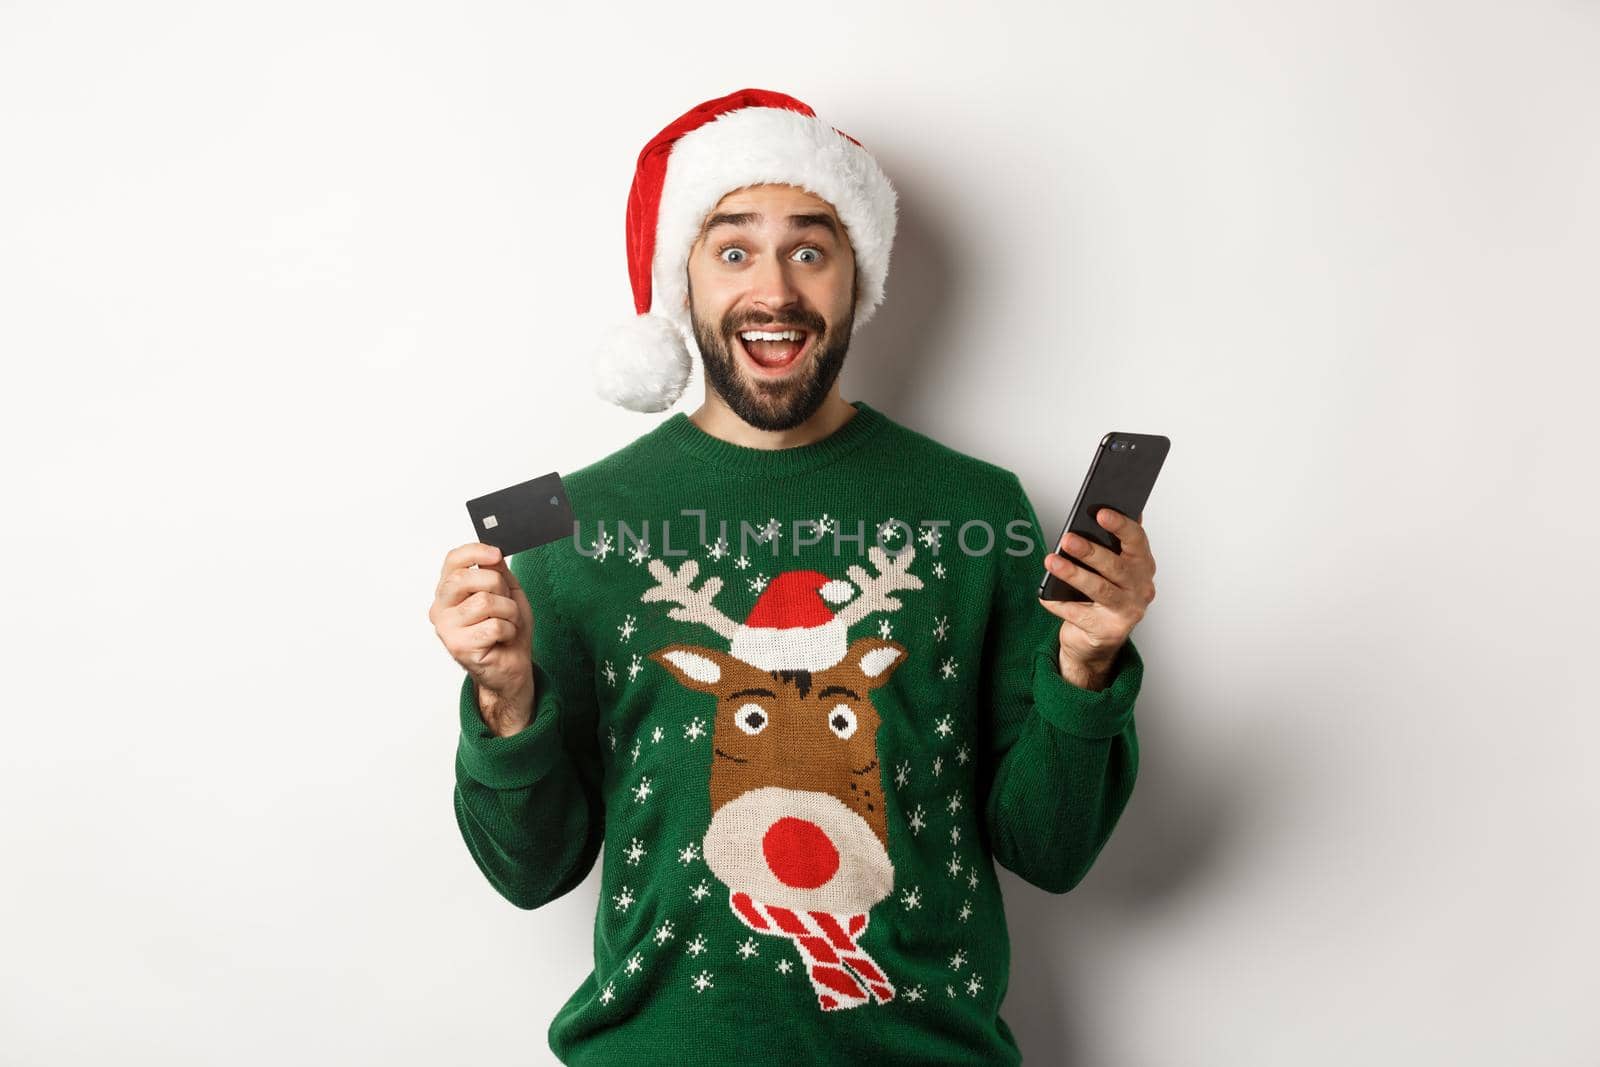 Online shopping and winter holidays concept. Surprised man in Santa hat, holding mobile phone and credit card, standing in sweater over white background.